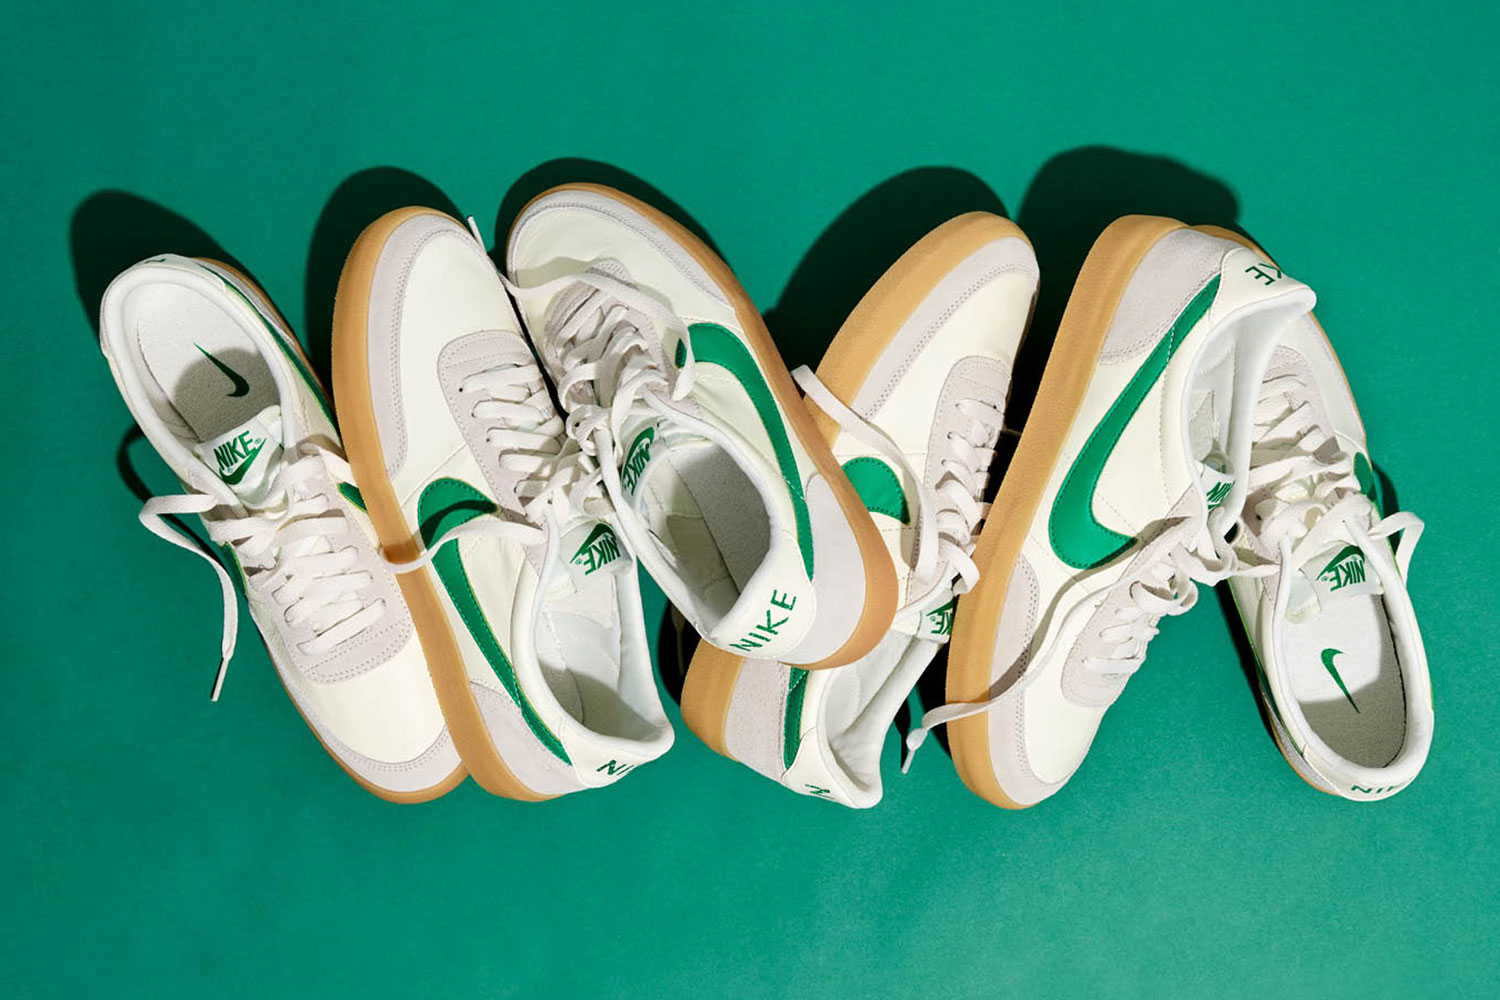 J. Crew and Nike Drop the Killshot 2 Sneaker and Already Sold Out -